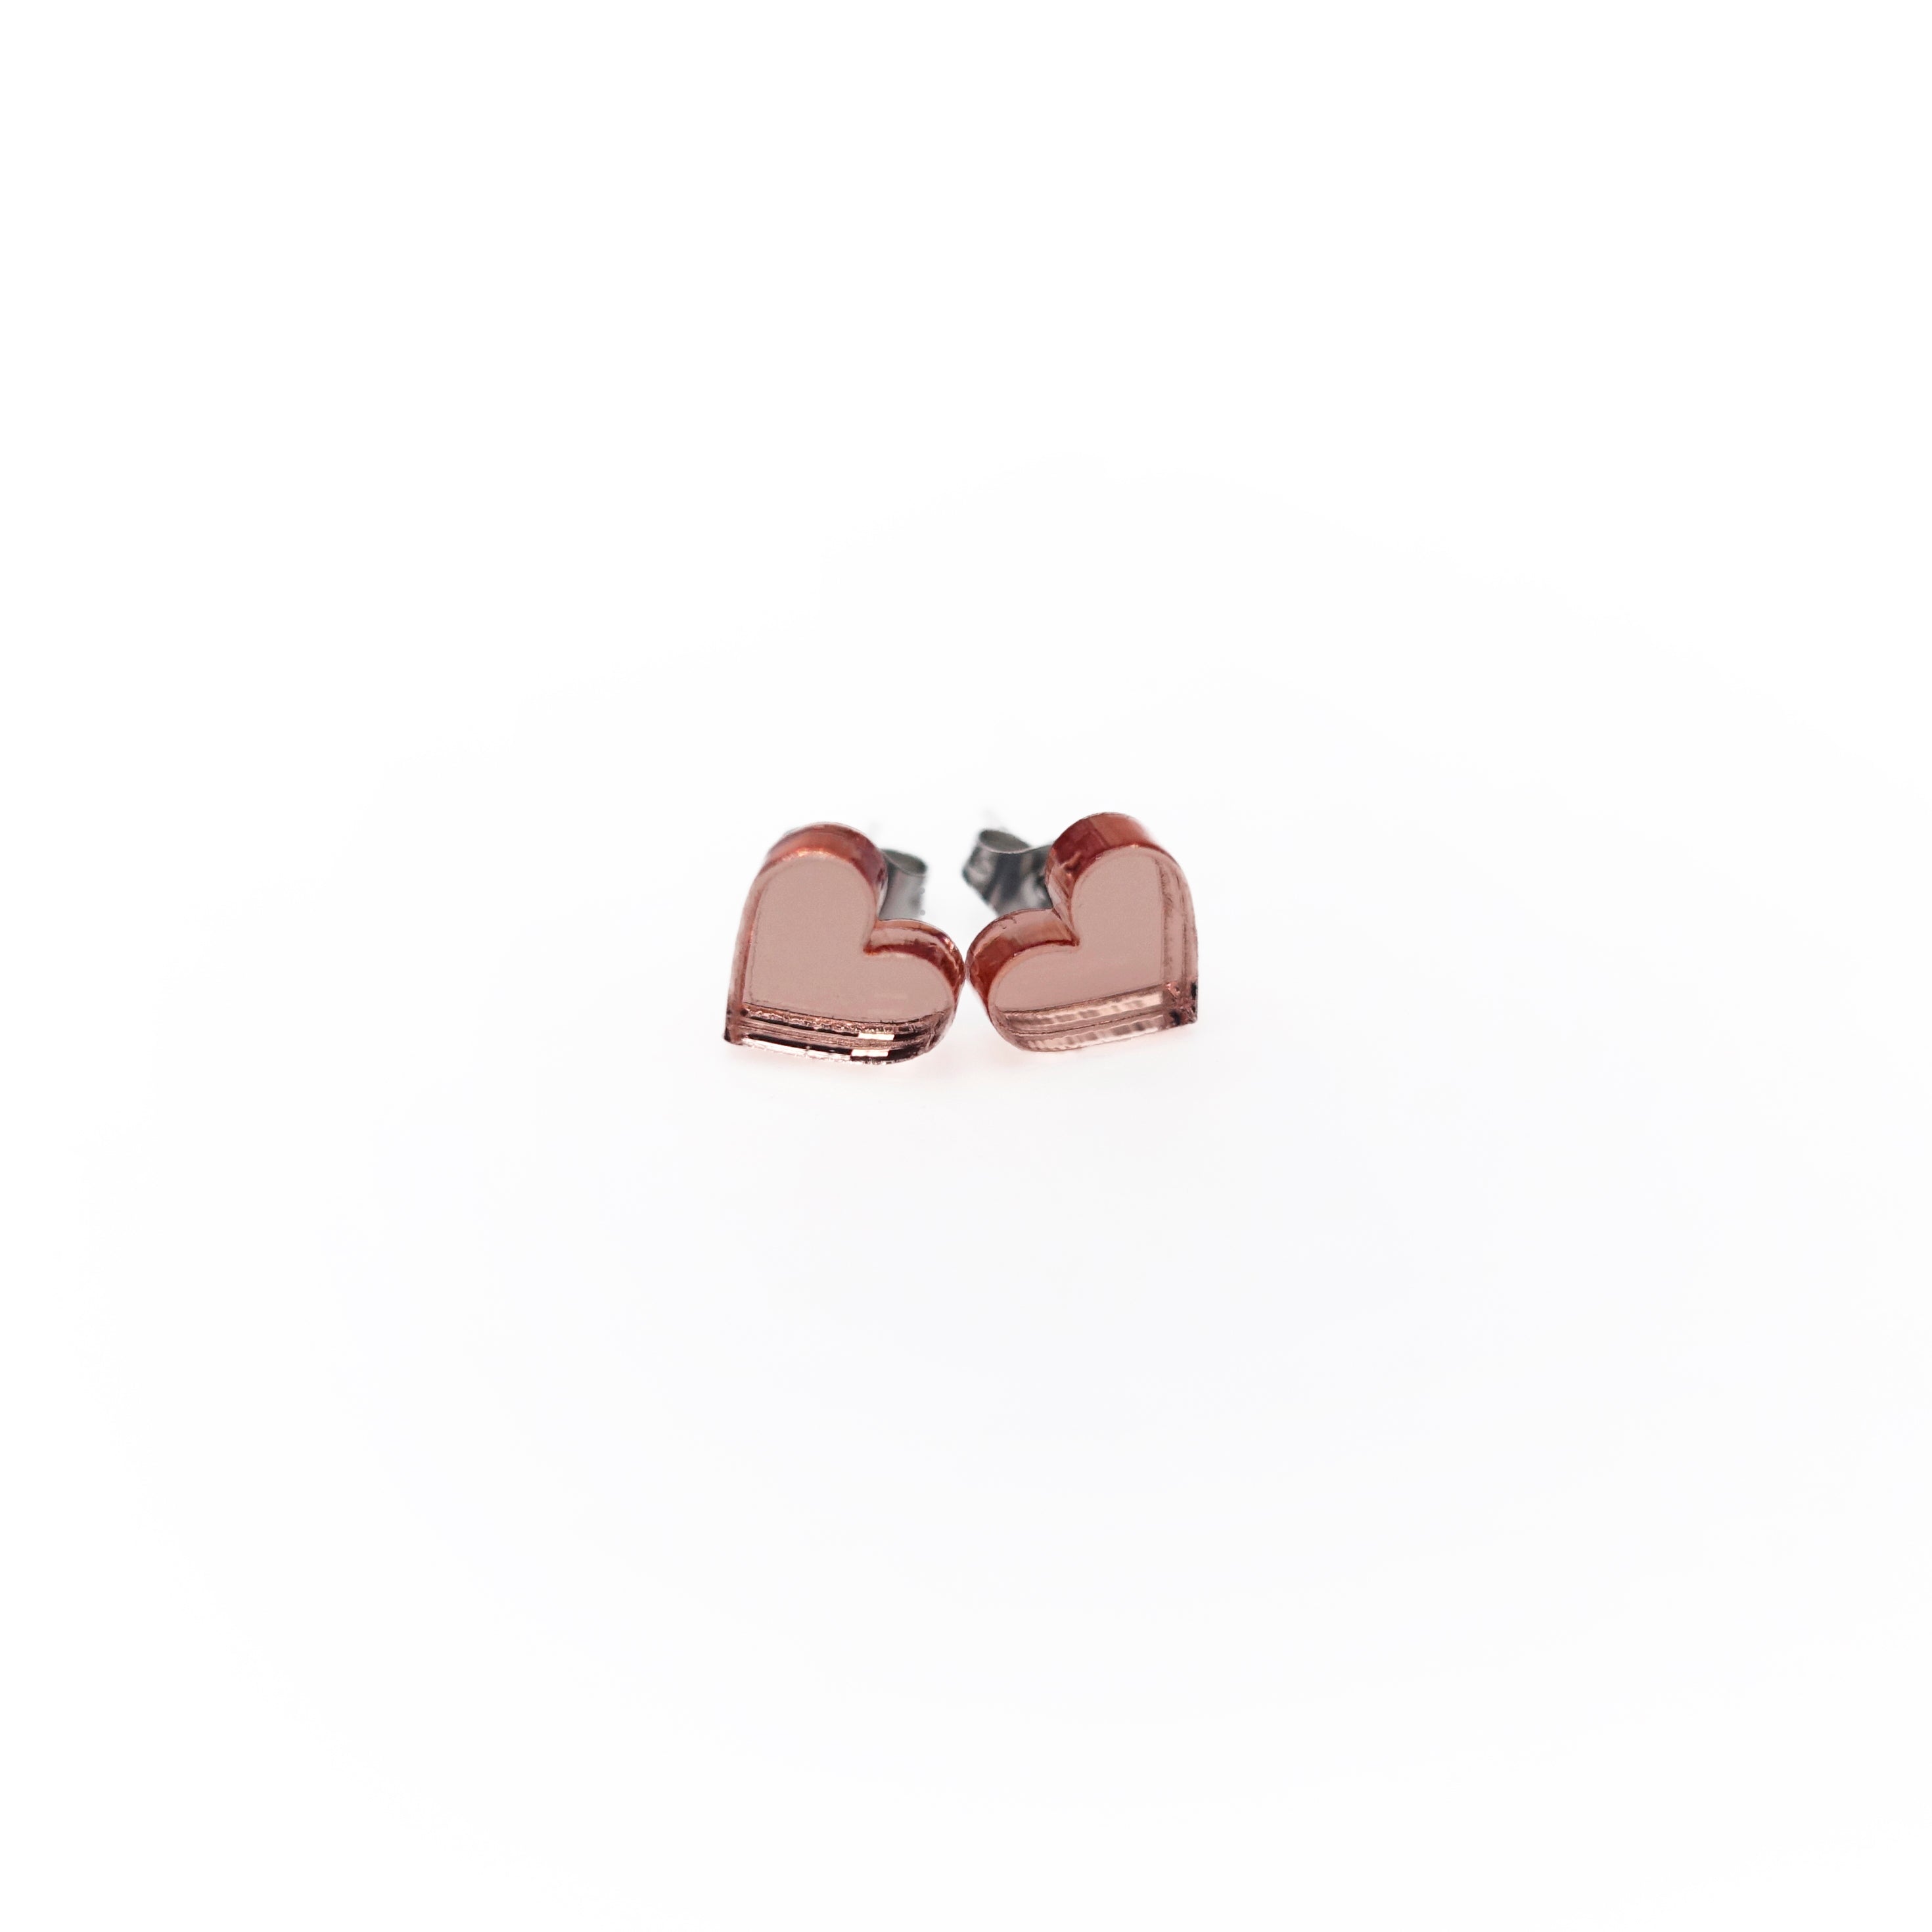 Rose gold mirror tiny heart stud earrings shown on a white background. 